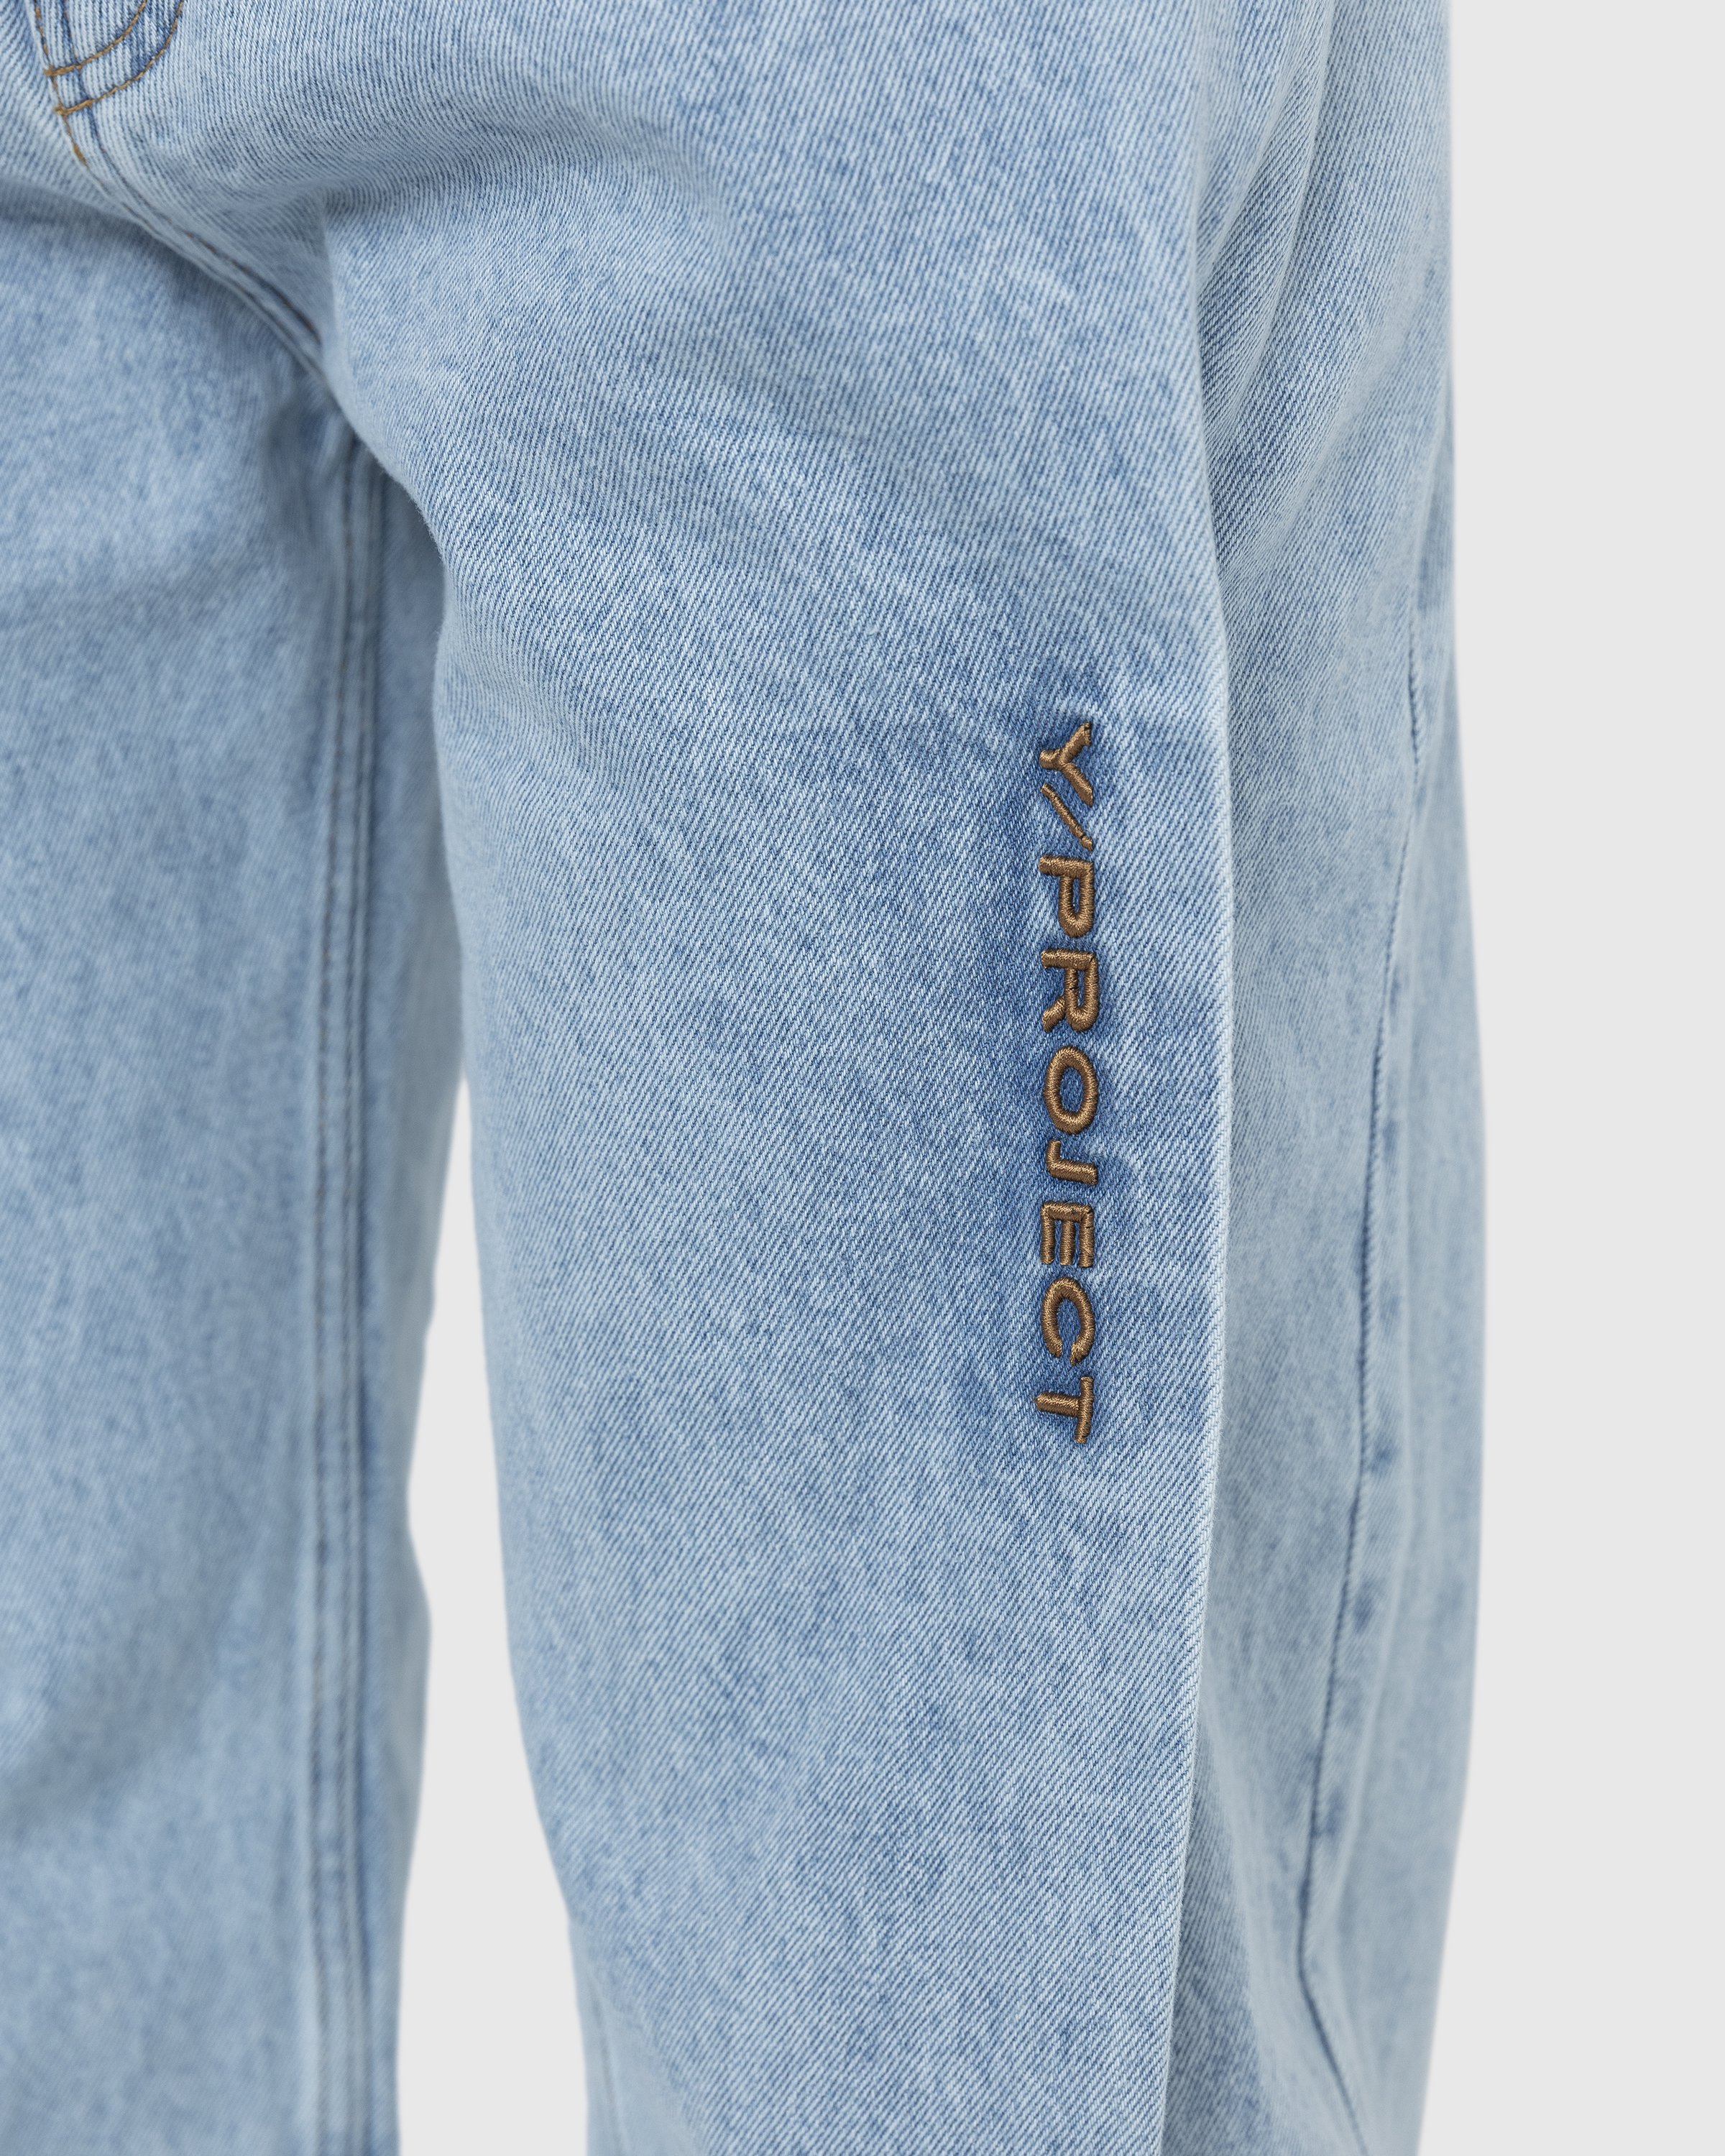 Y/Project - Pinched Logo Jeans Blue - Clothing - Blue - Image 7